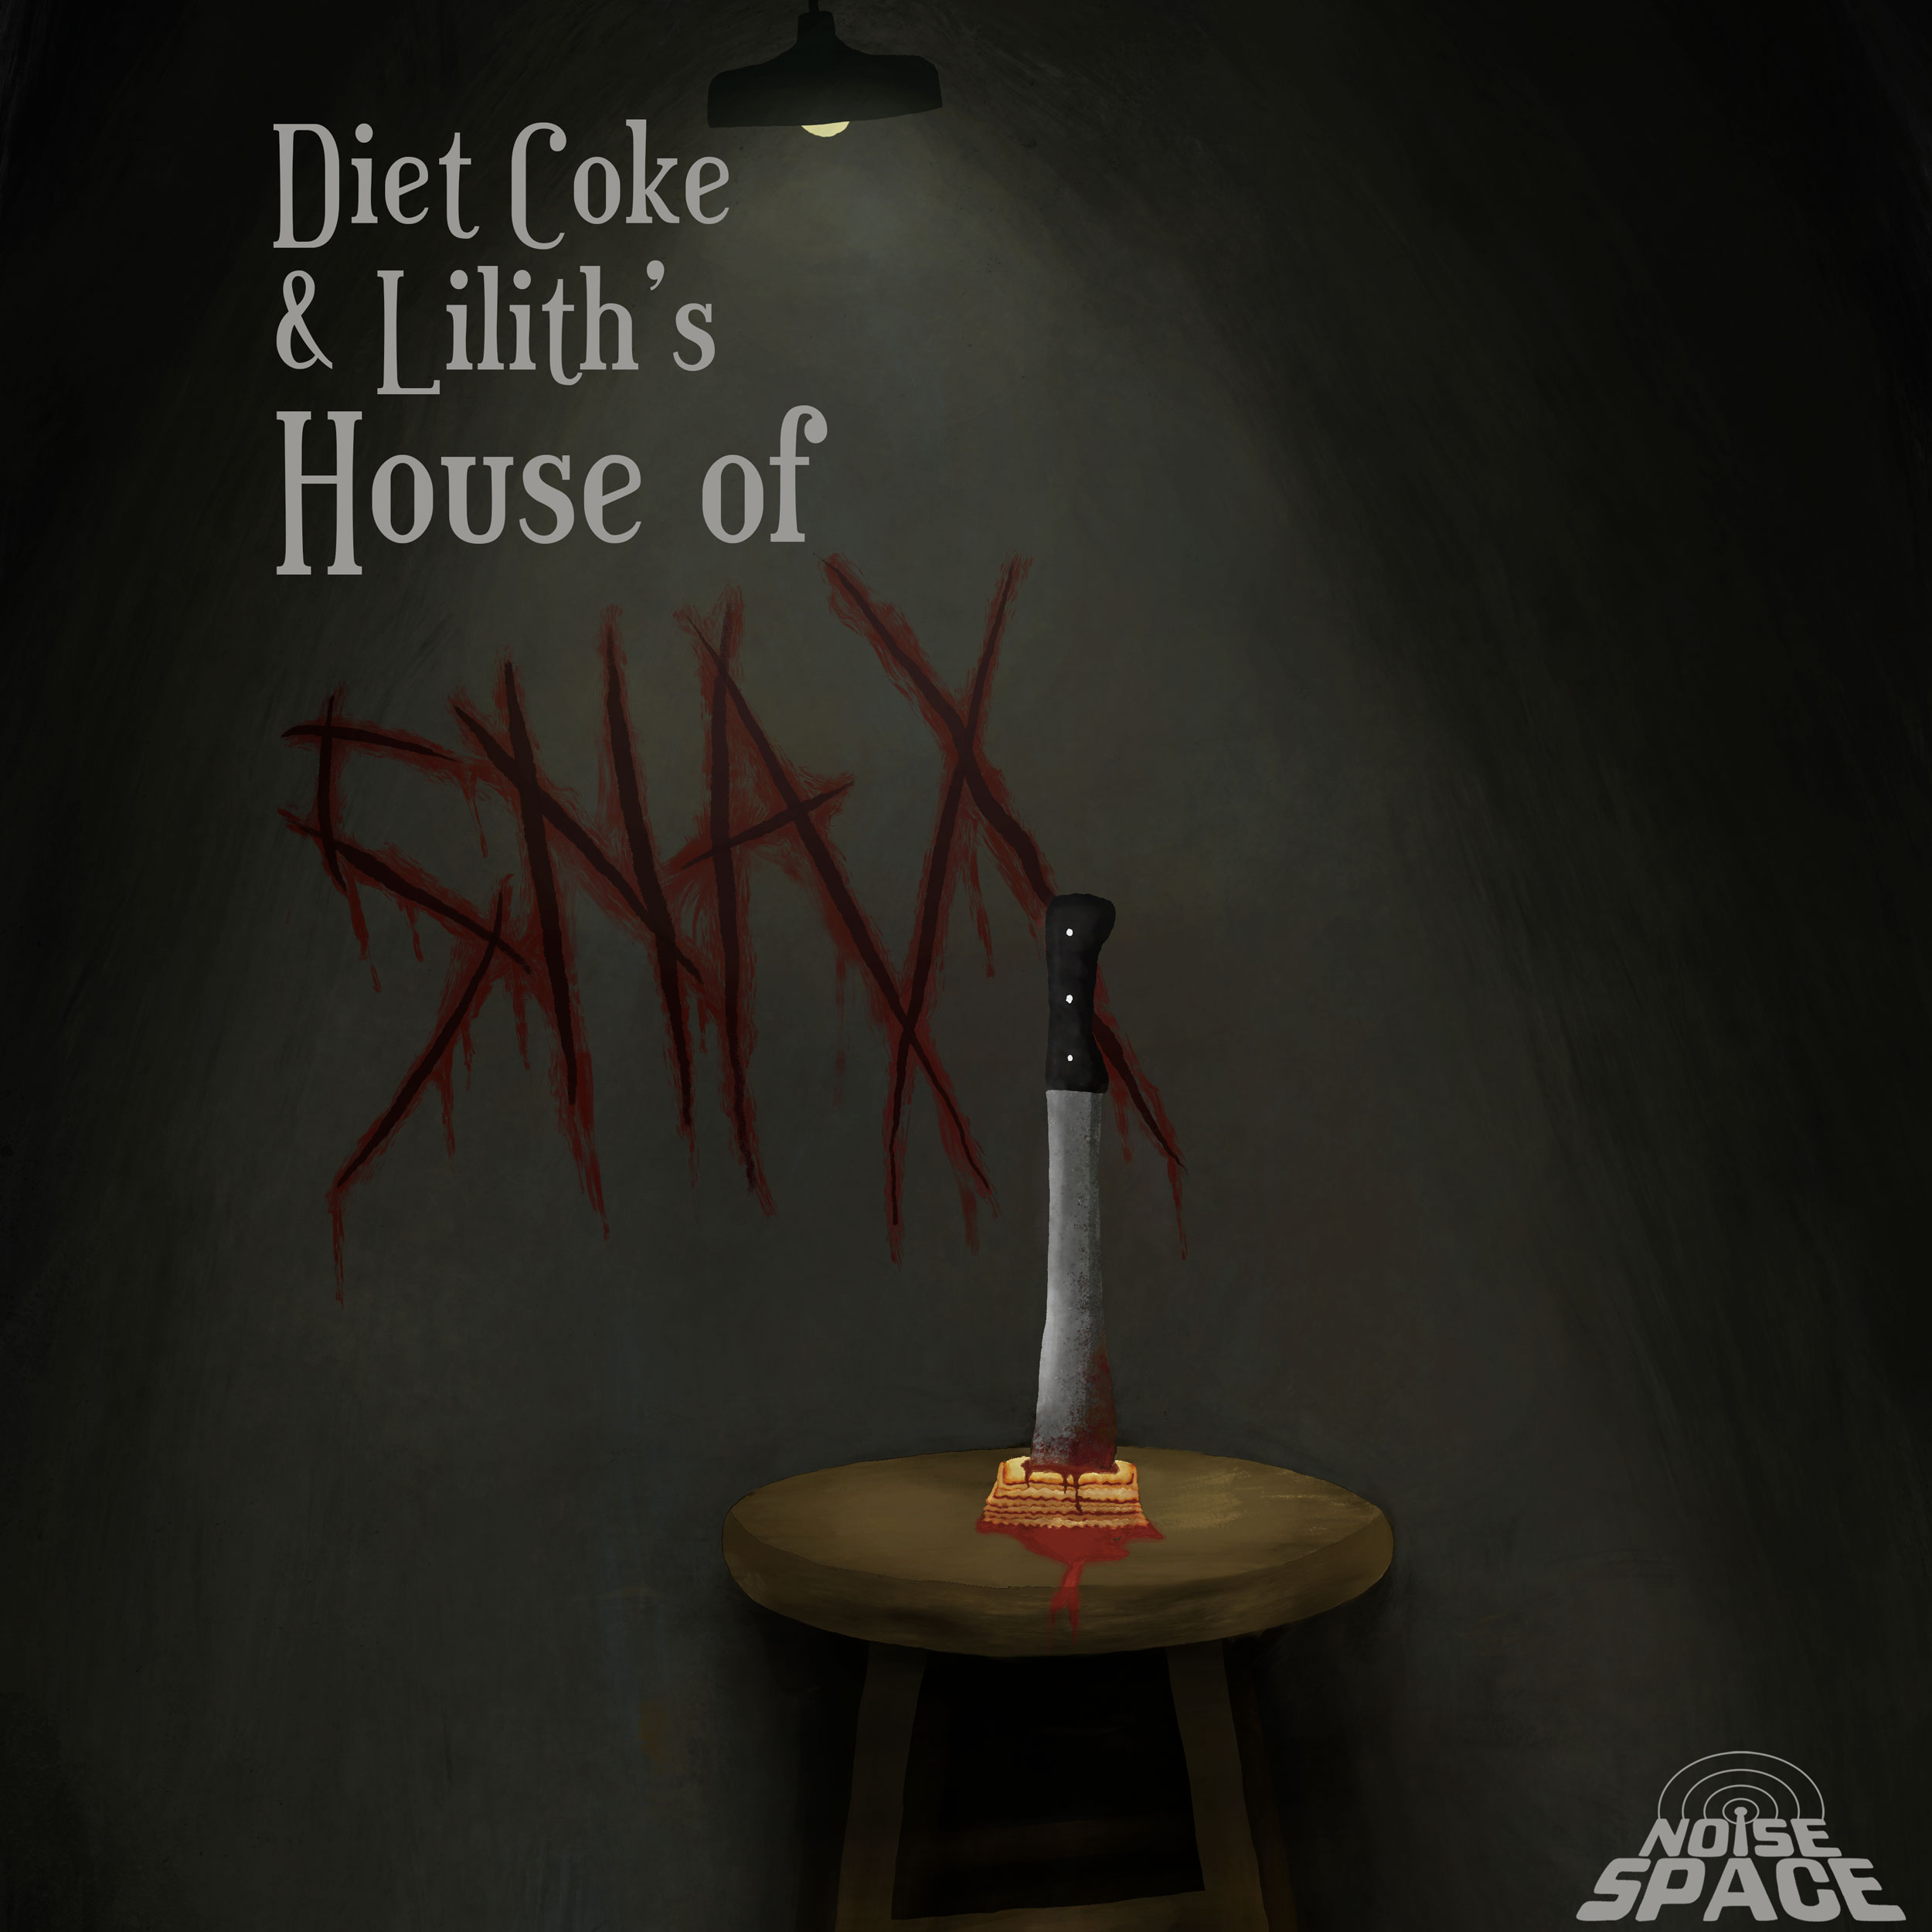 Diet Coke & Lilith’s House of Snax